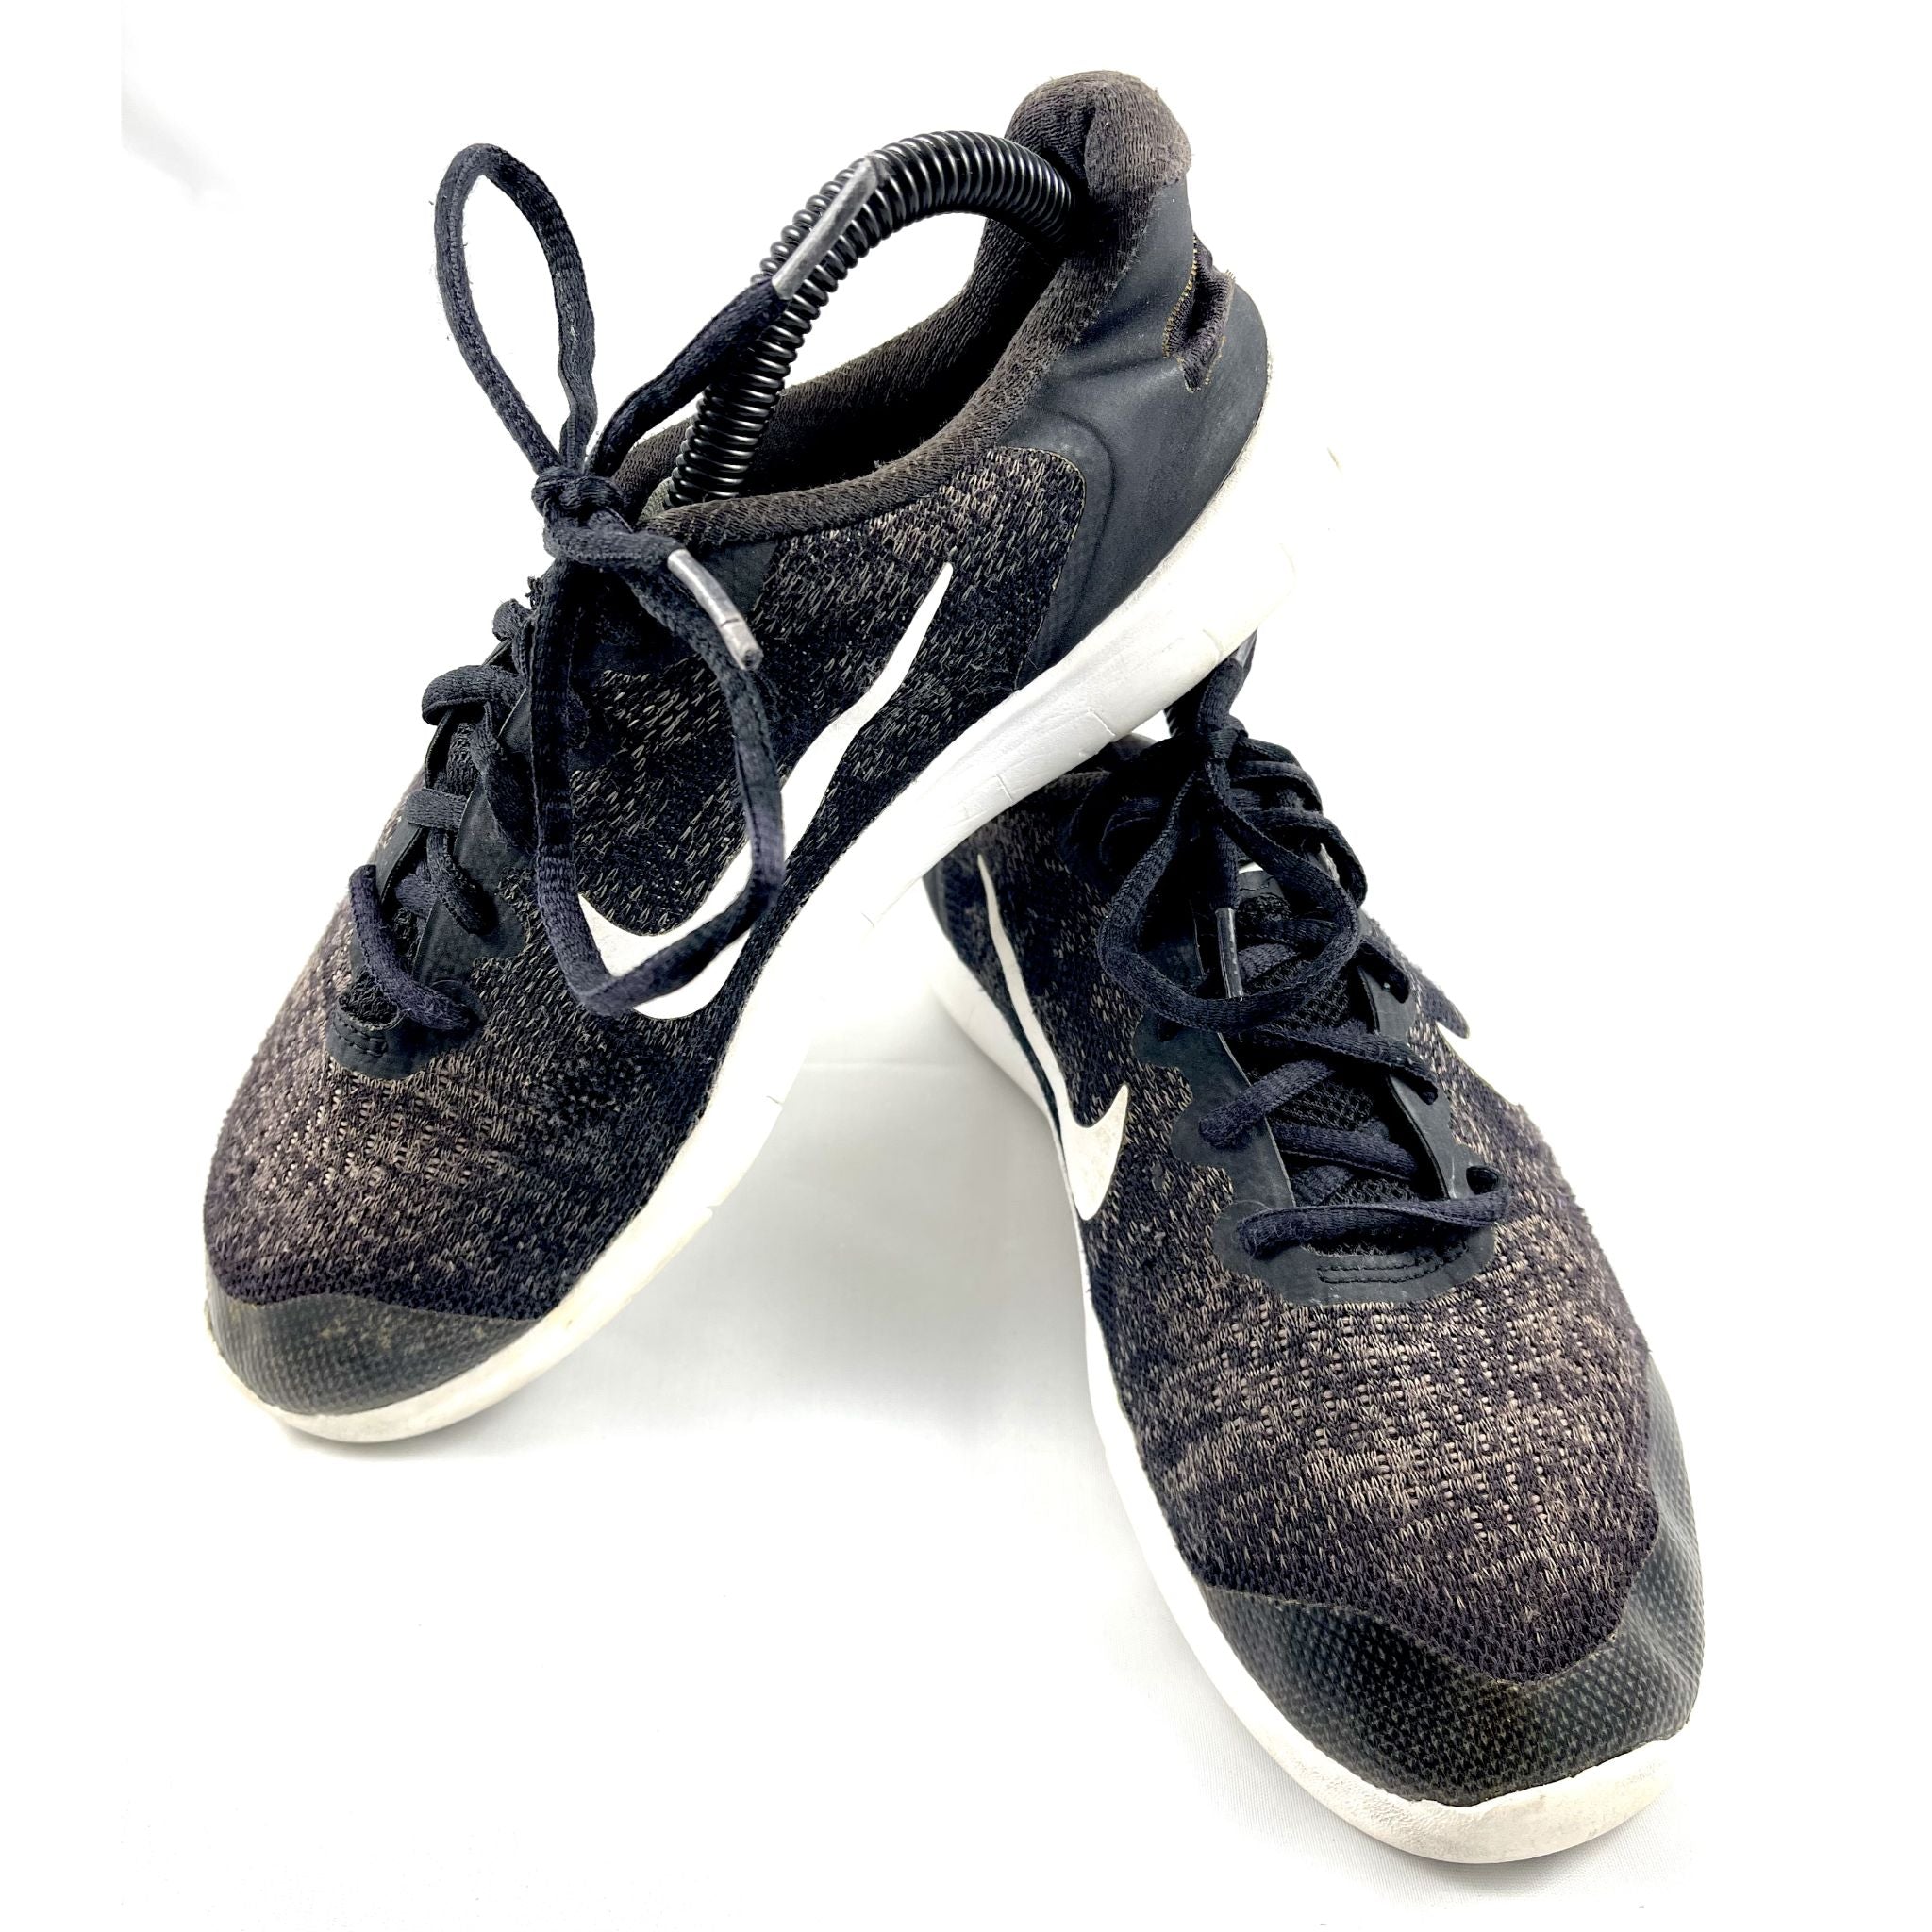 Nike Black Shoes for Men and Women